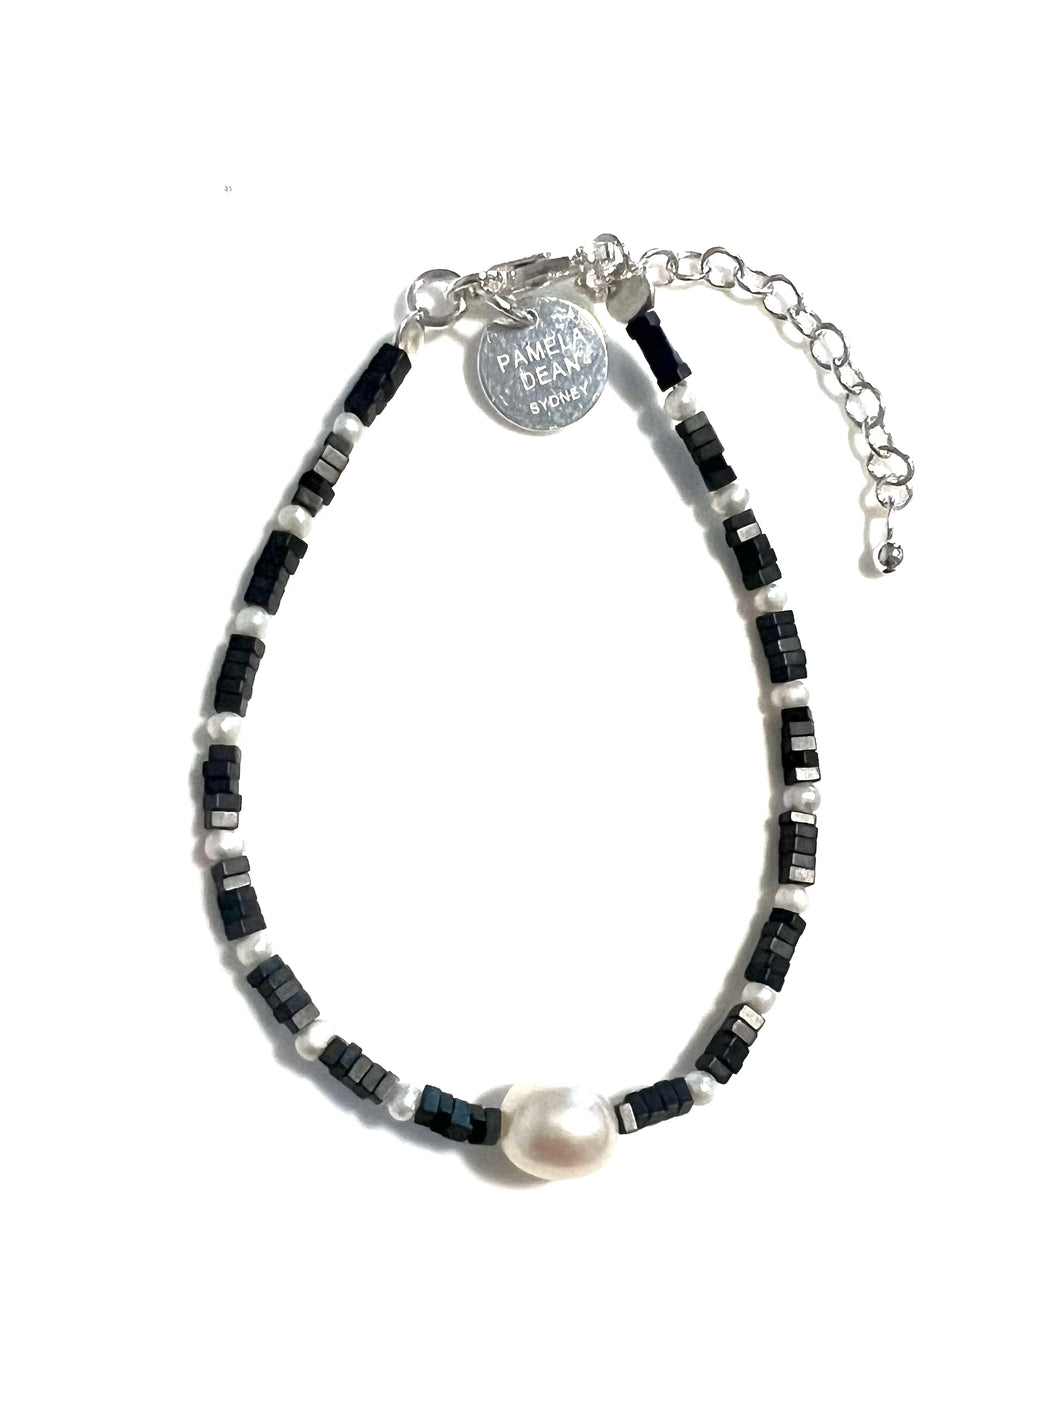 Grey Bracelet with Matt Hematite Square Beads Pearls and Sterling Silver